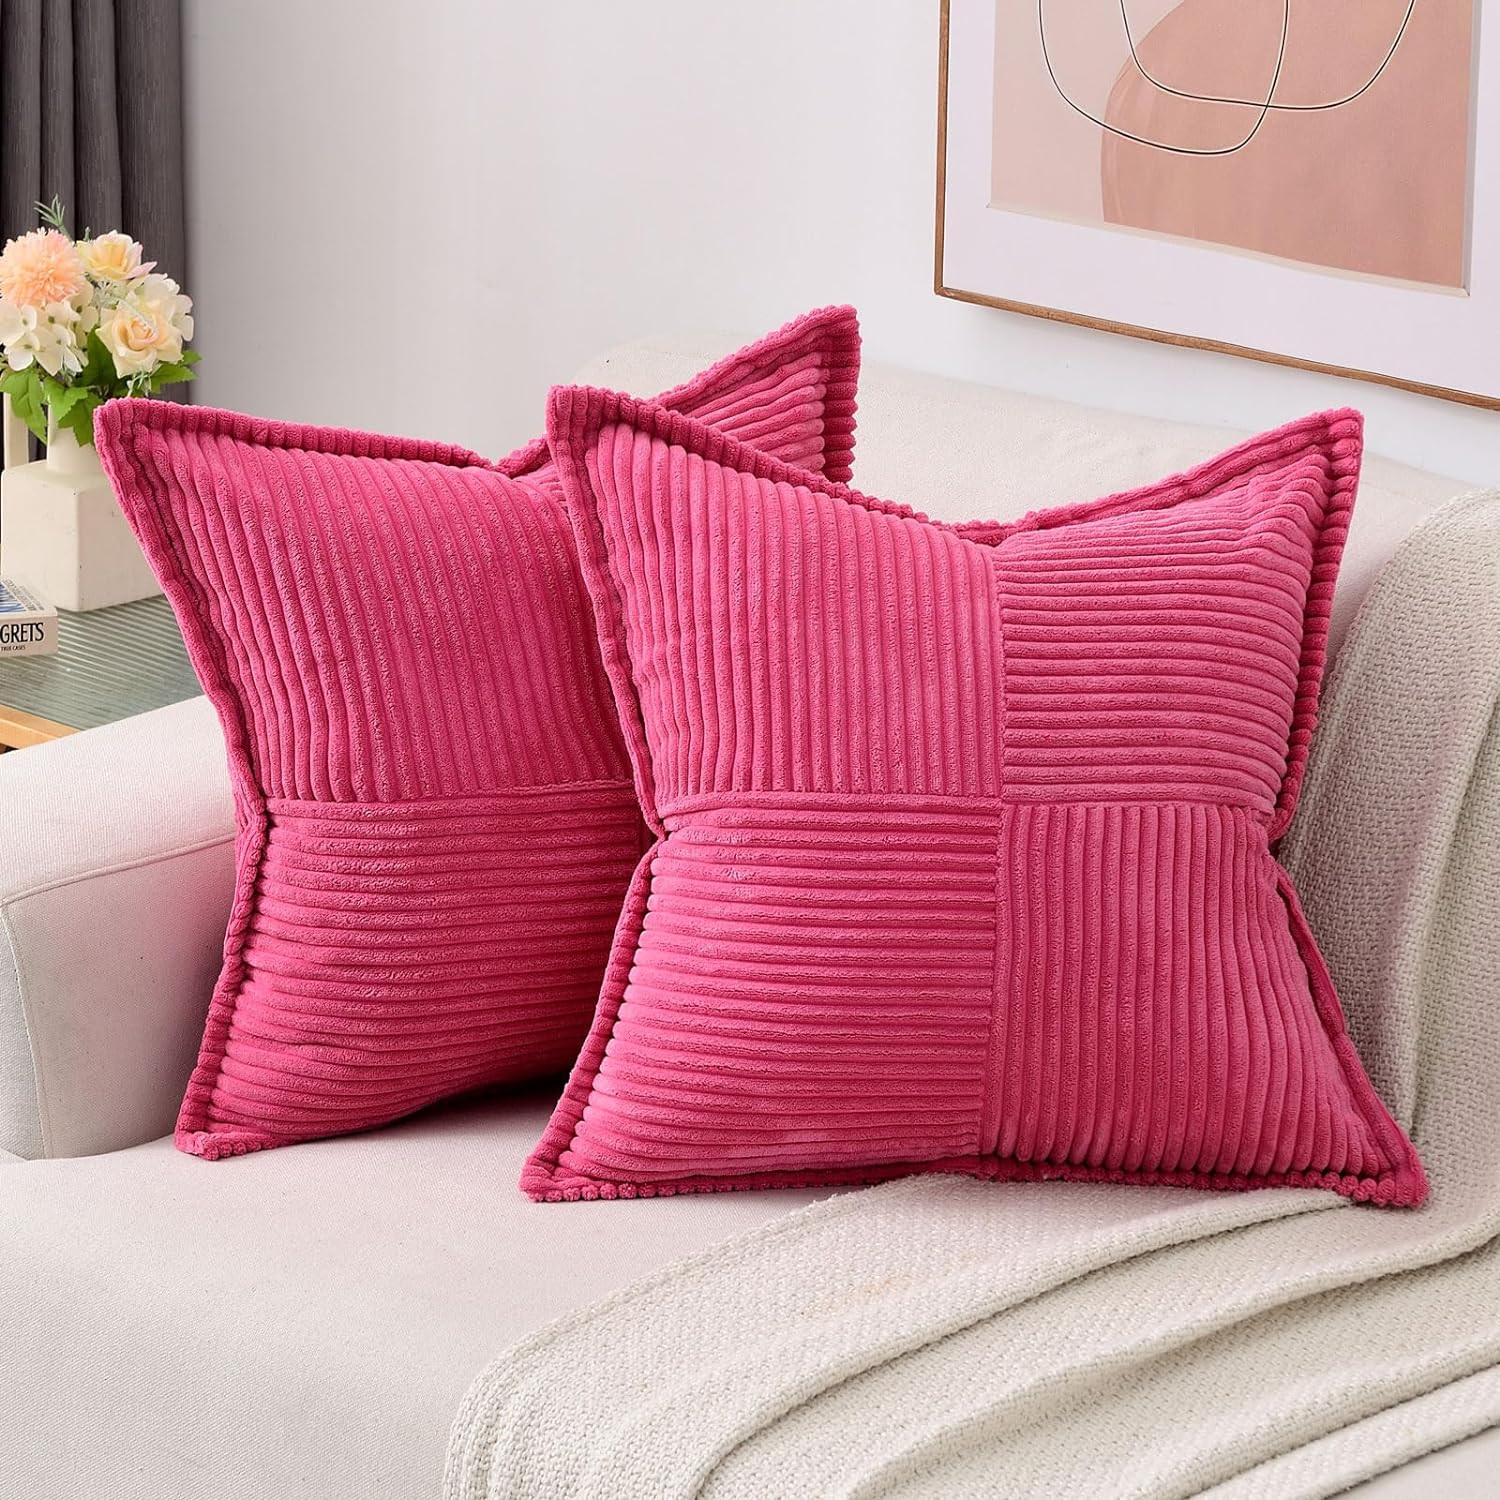 HAUSSY Hot Pink Throw Pillow Covers 18x18 Inch Set of 2,Soft Solid Corduroy Striped/Wide Bordered,Square Decorative Cushion Case,Winter Home Decorations for Couch,Bed